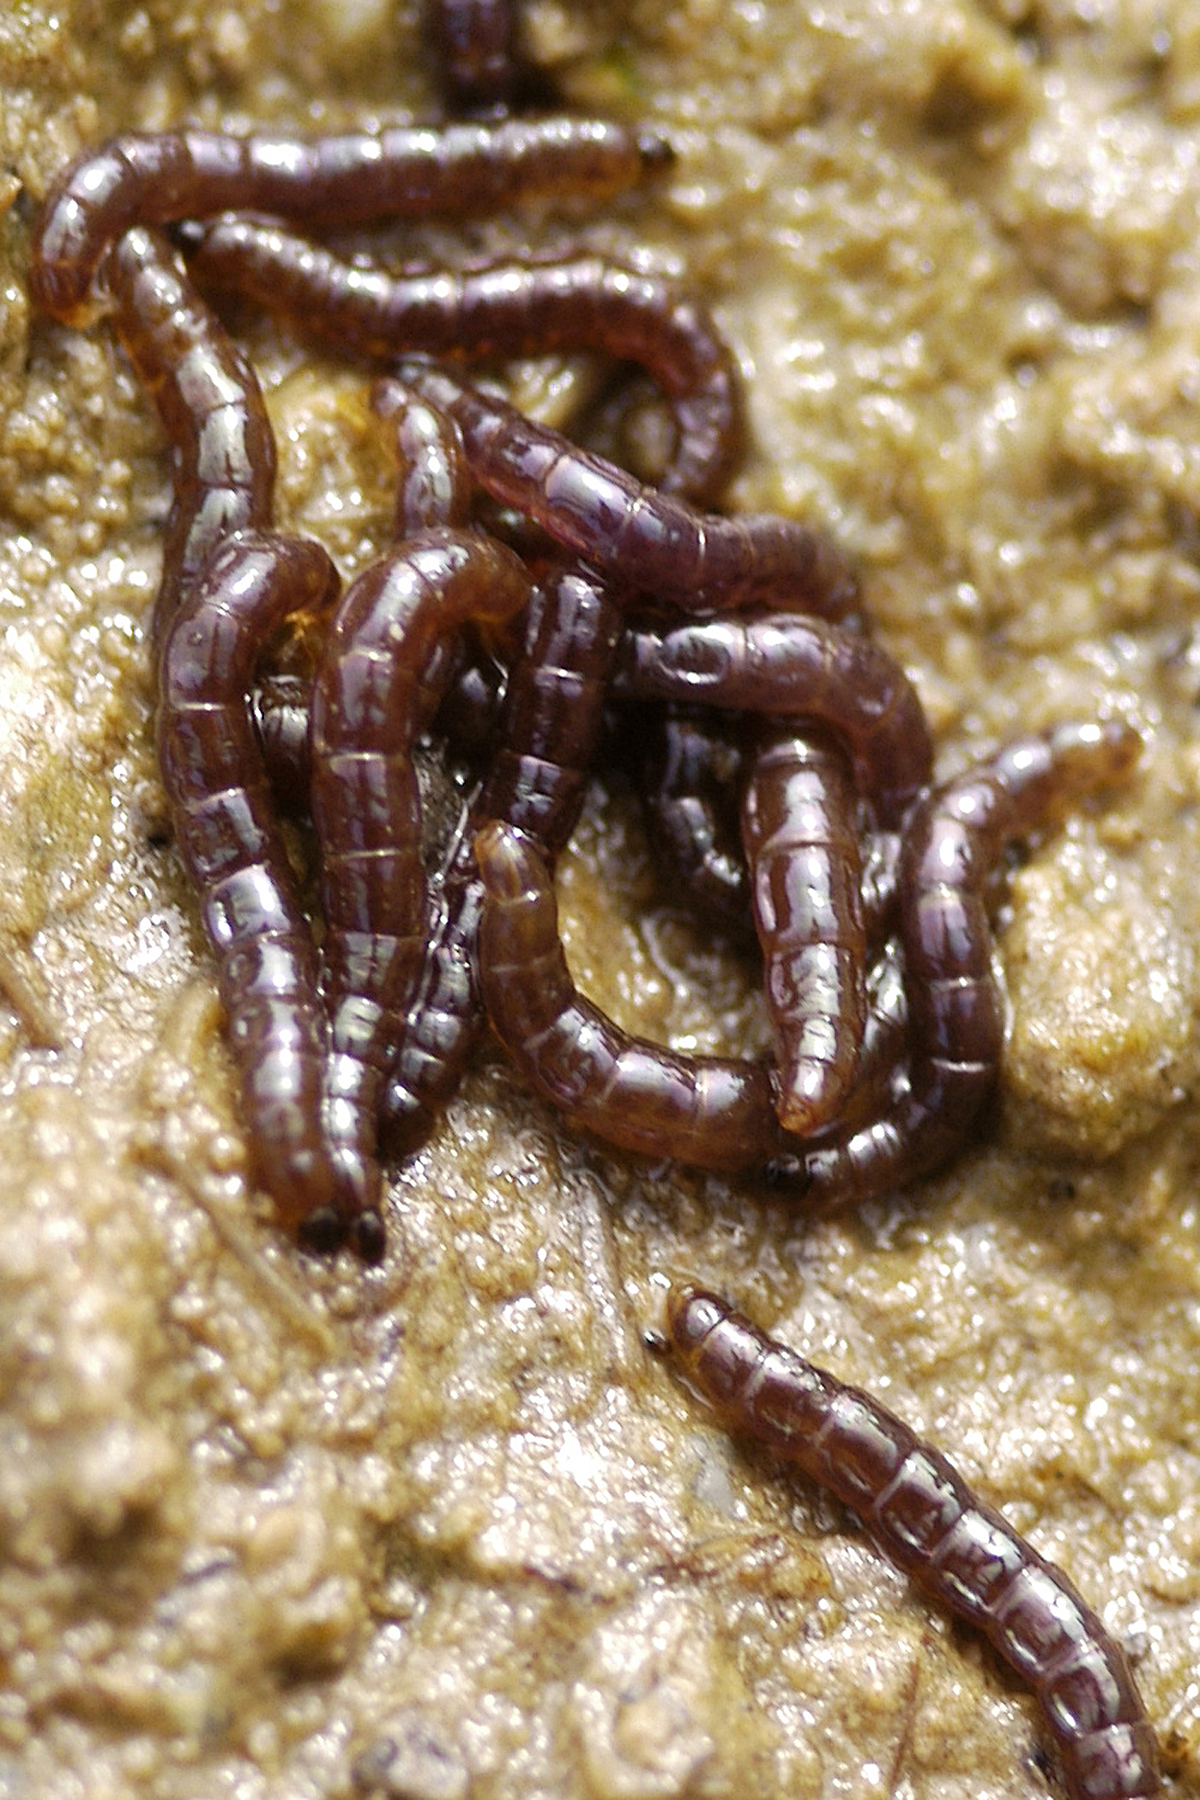 Worm-like organisms squirm on a rock surface.